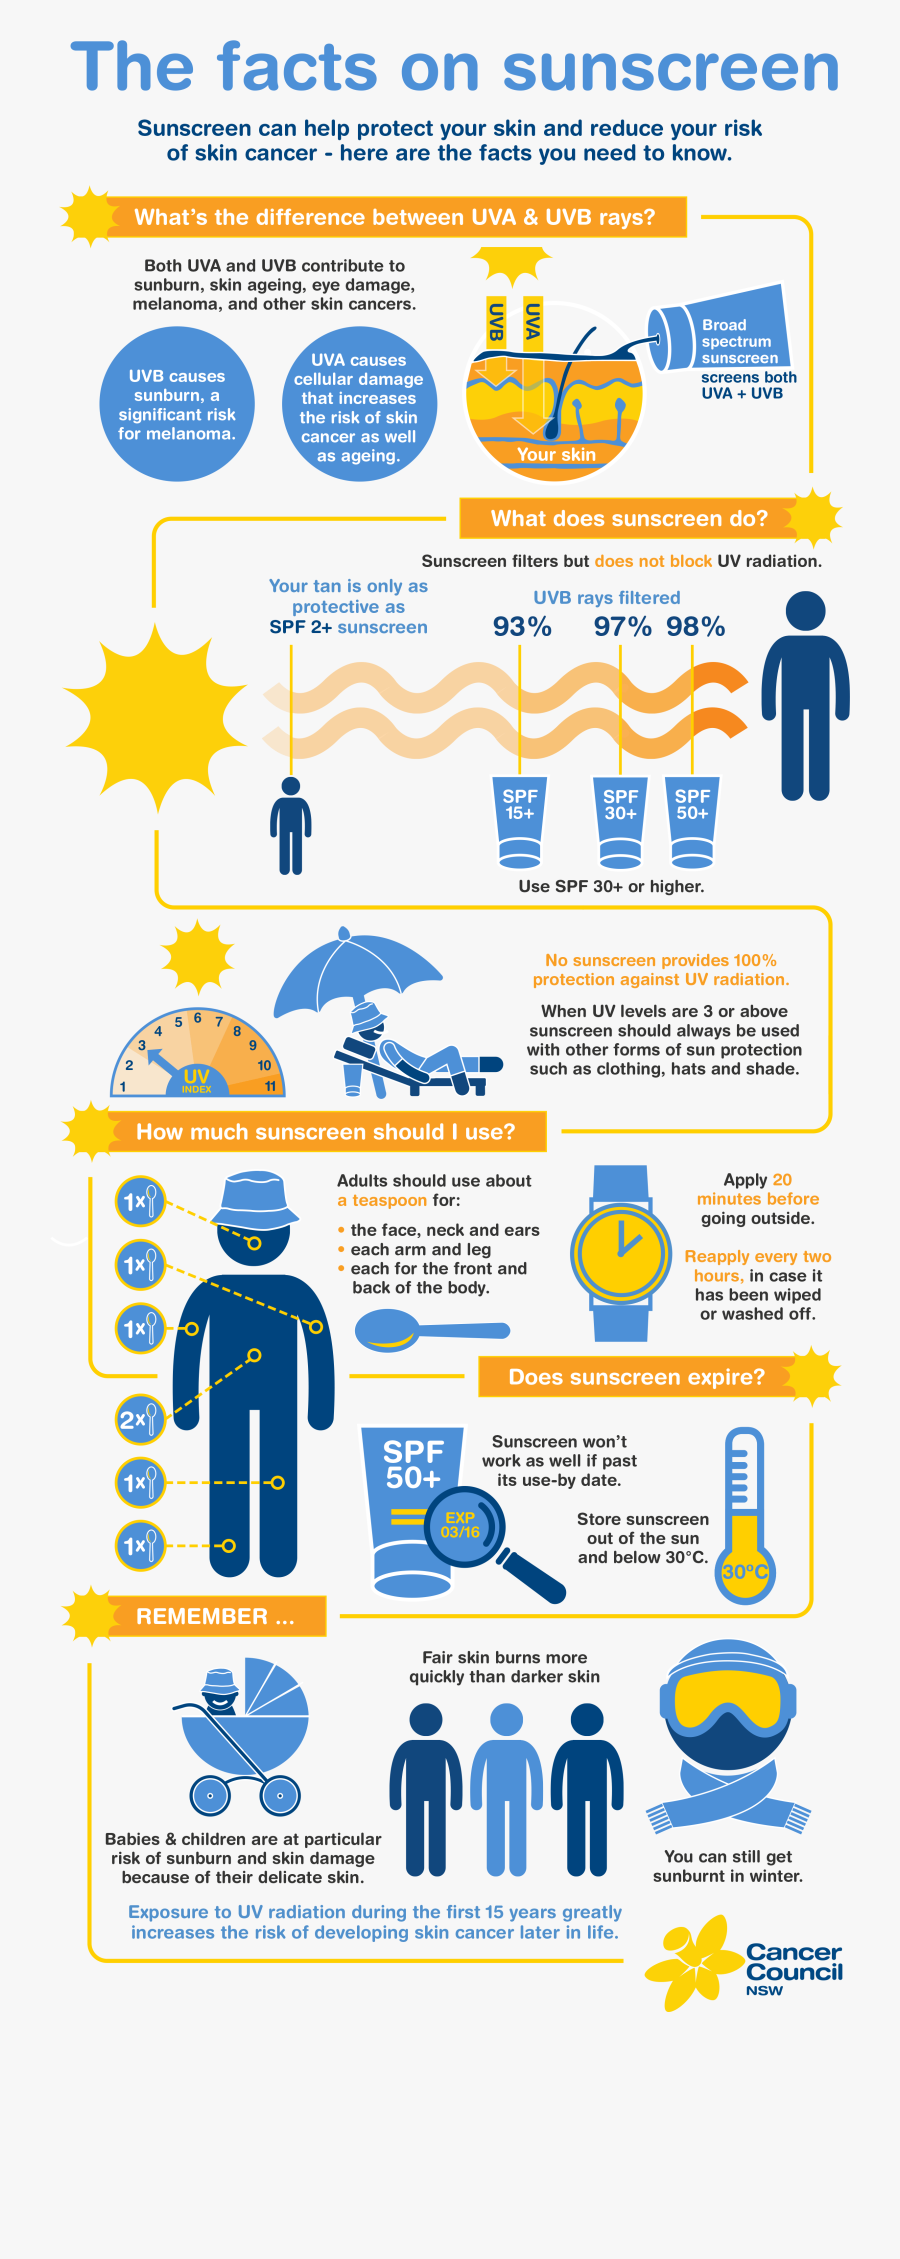 How To Use Sunscreen - Sun Protection In Winter, Transparent Clipart